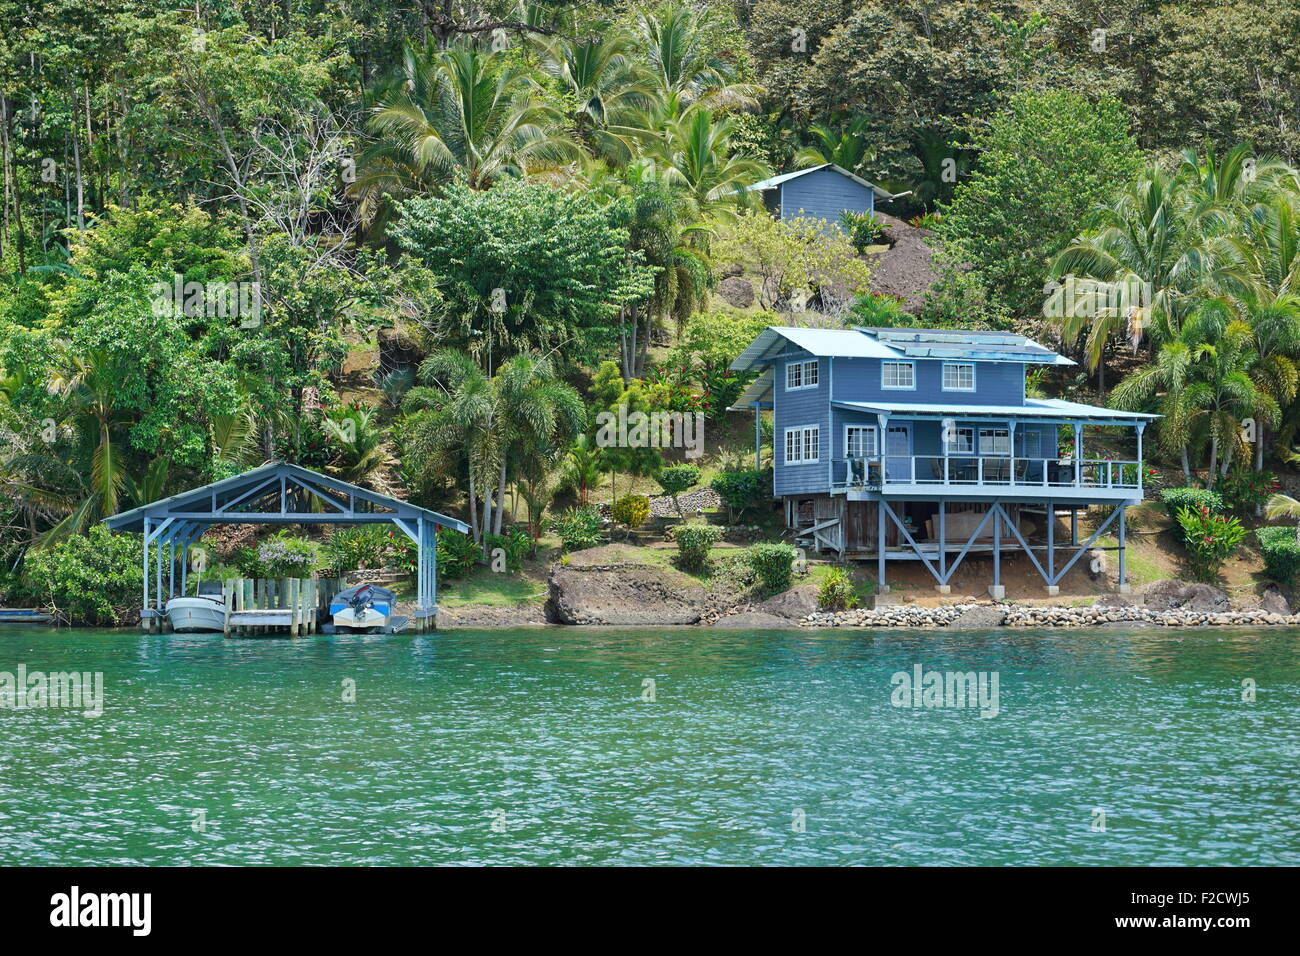 Coastal property on lush tropical shore with boats at dock and an house, Caribbean sea, Panama, Central America Stock Photo